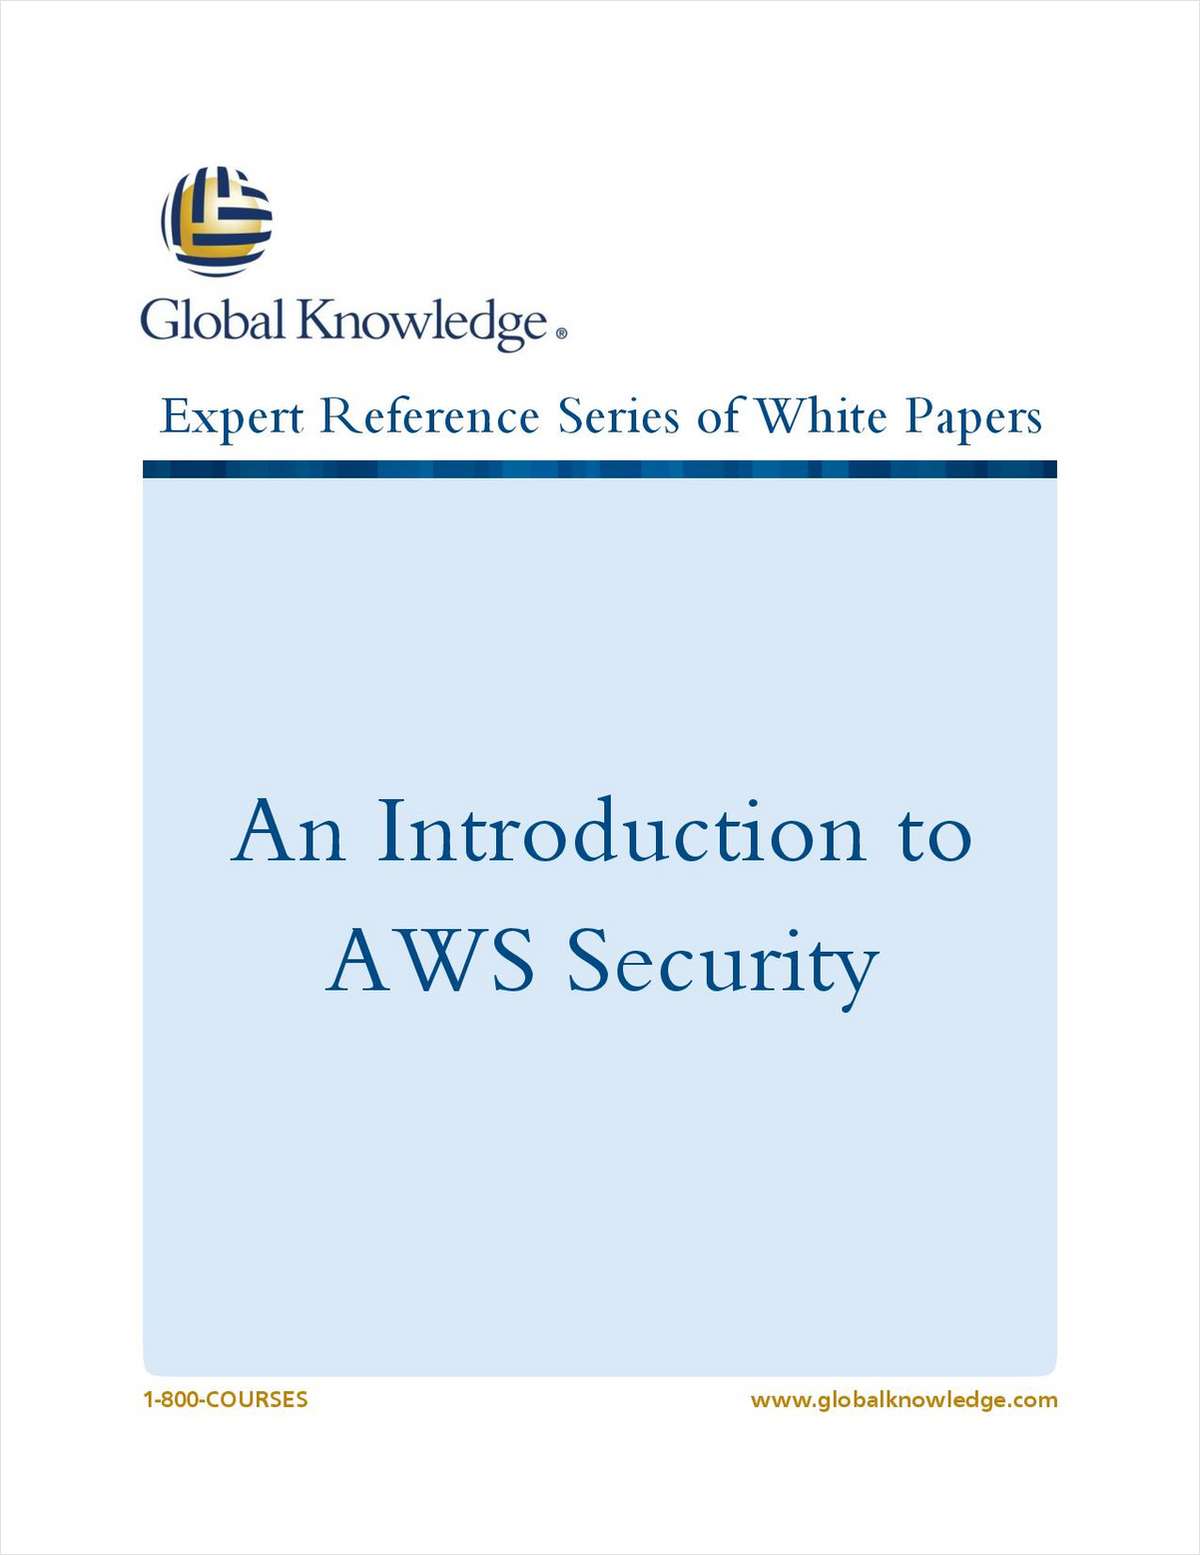 An Introduction to AWS Security